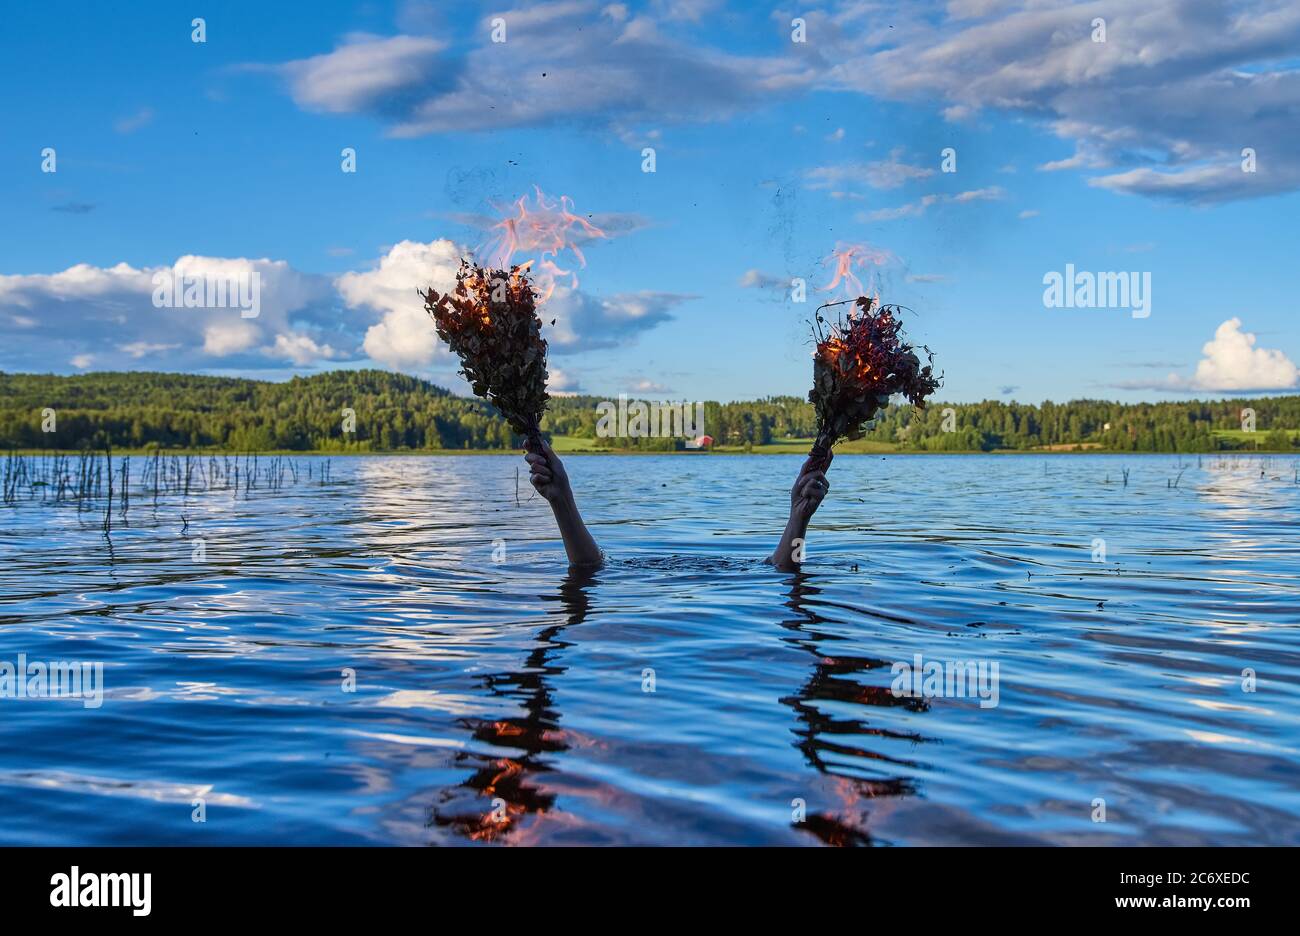 Submerged female holds two burning traditional Finnish bath whisks with her hands above water of a Finnish lake on calm summer evening. Stock Photo